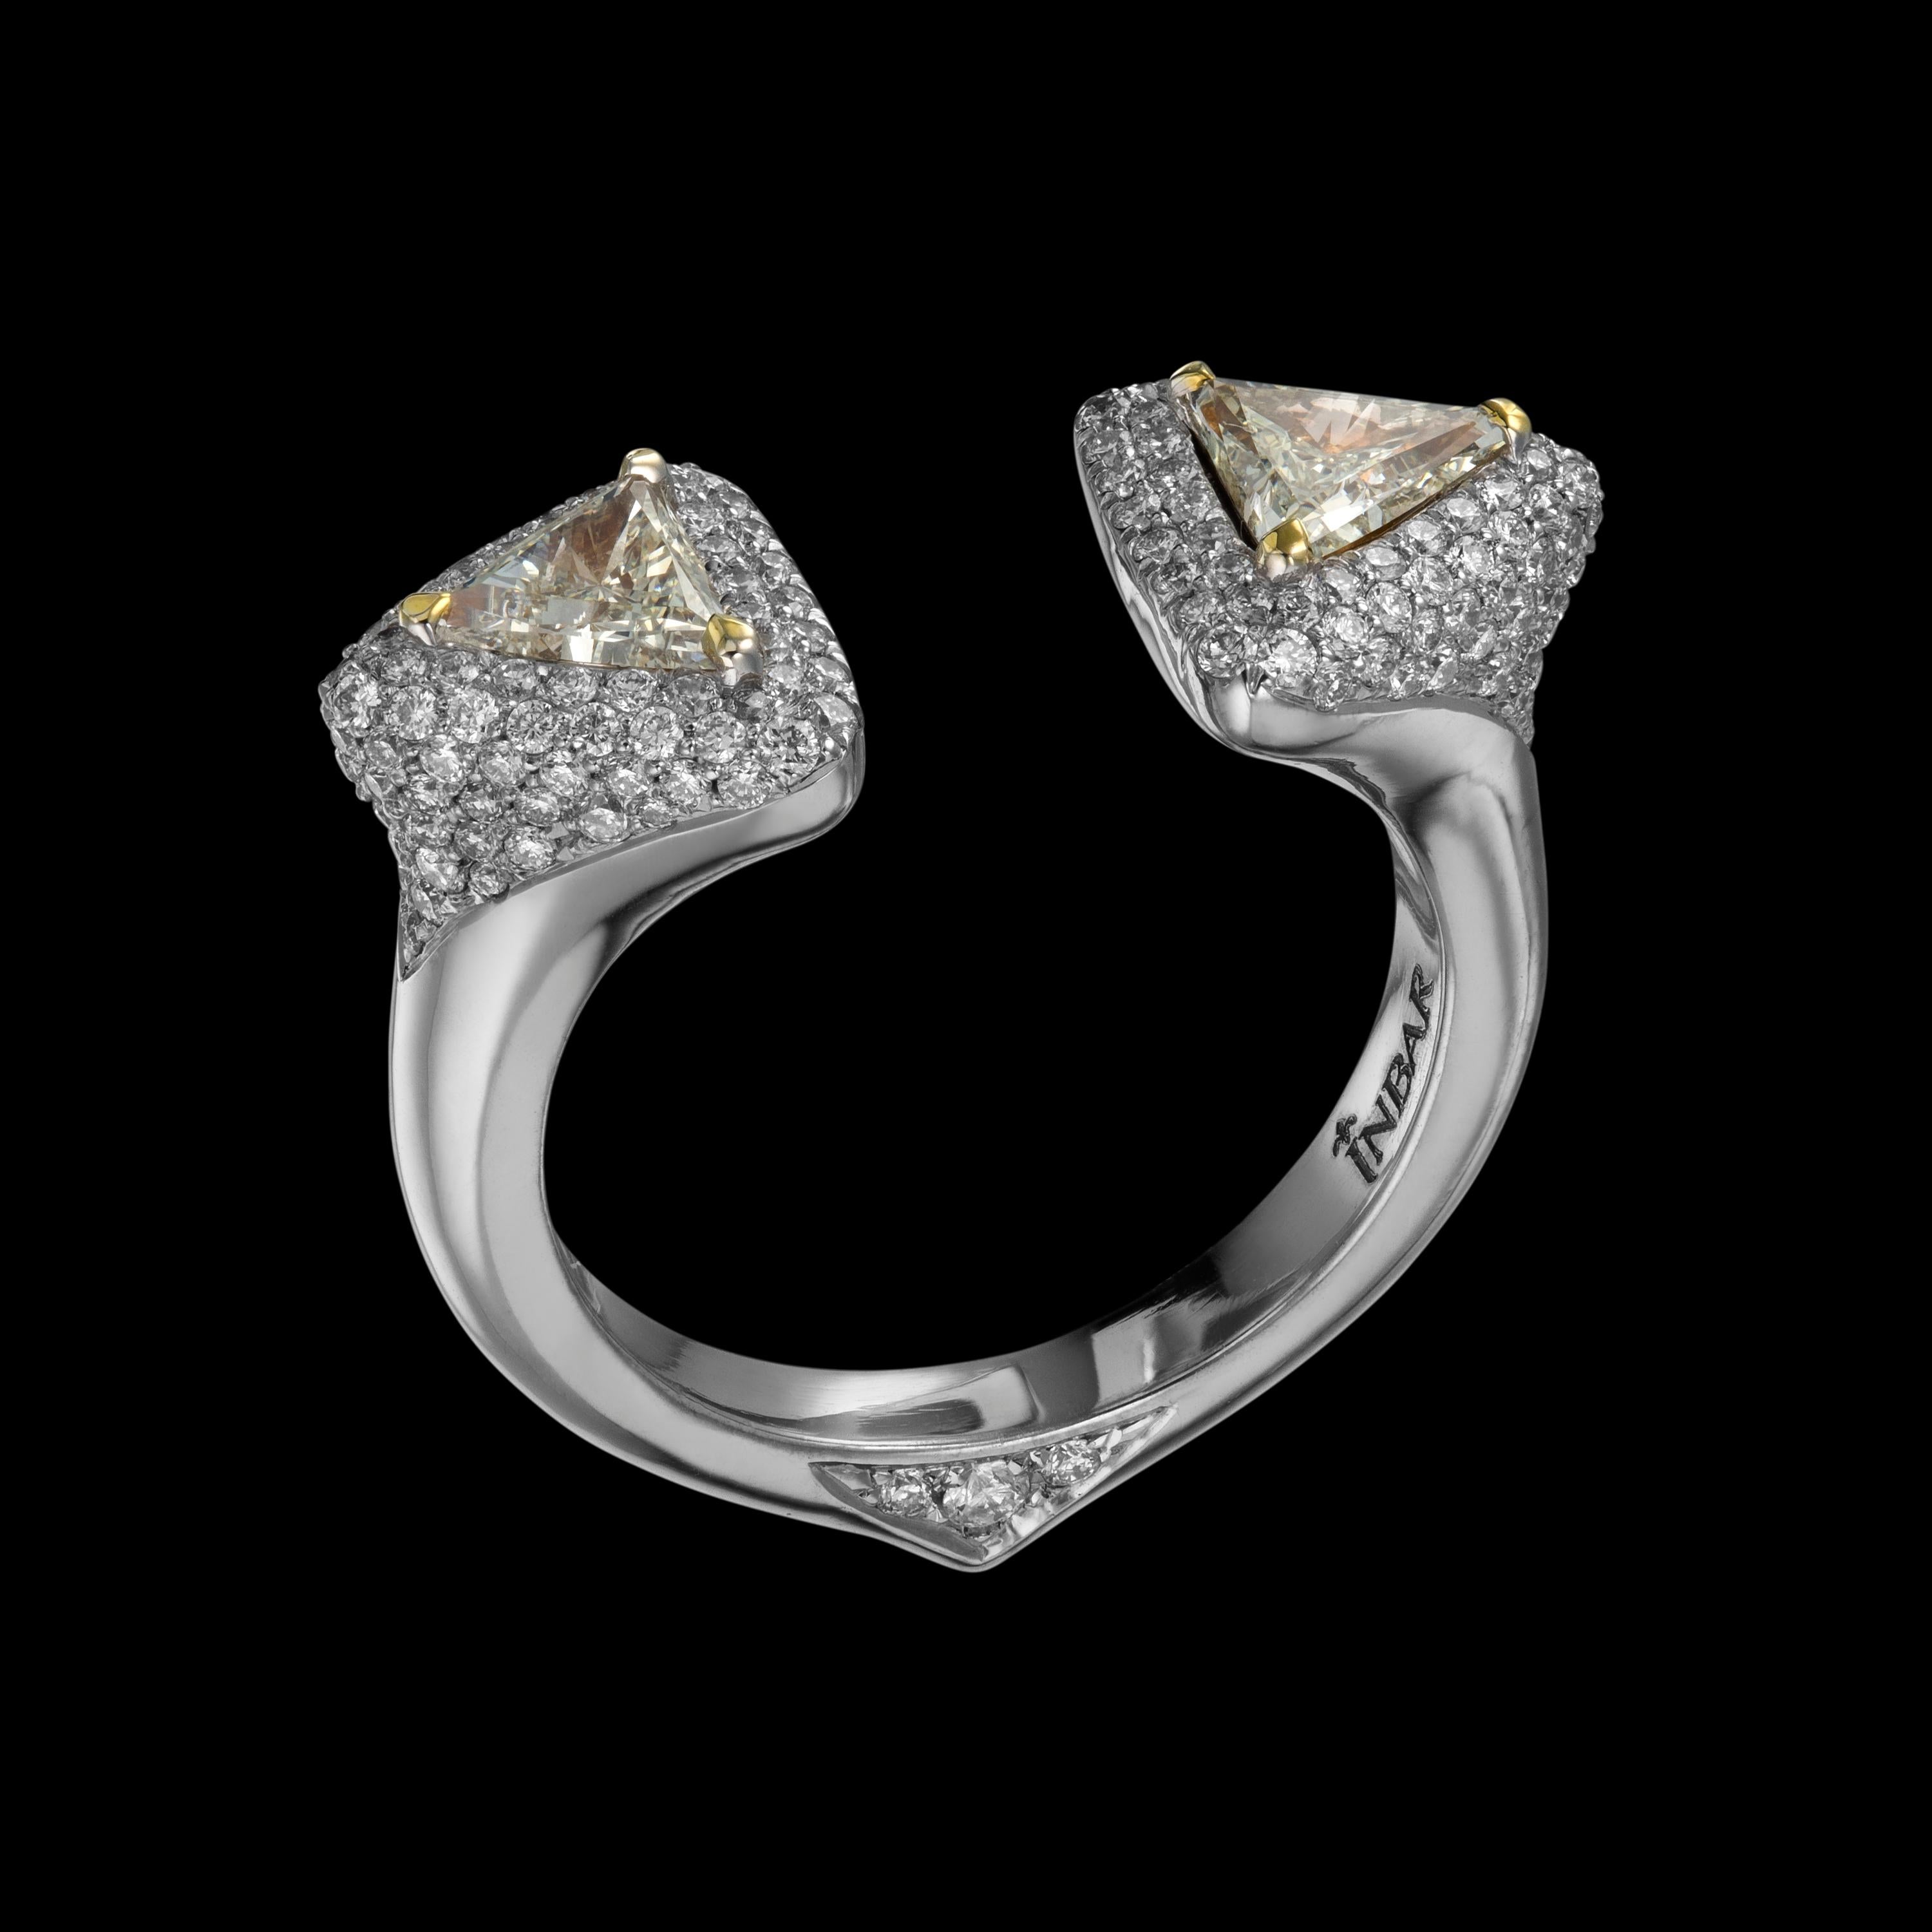 Two side triangle open, white gold, diamond ring with 3D pave setting.